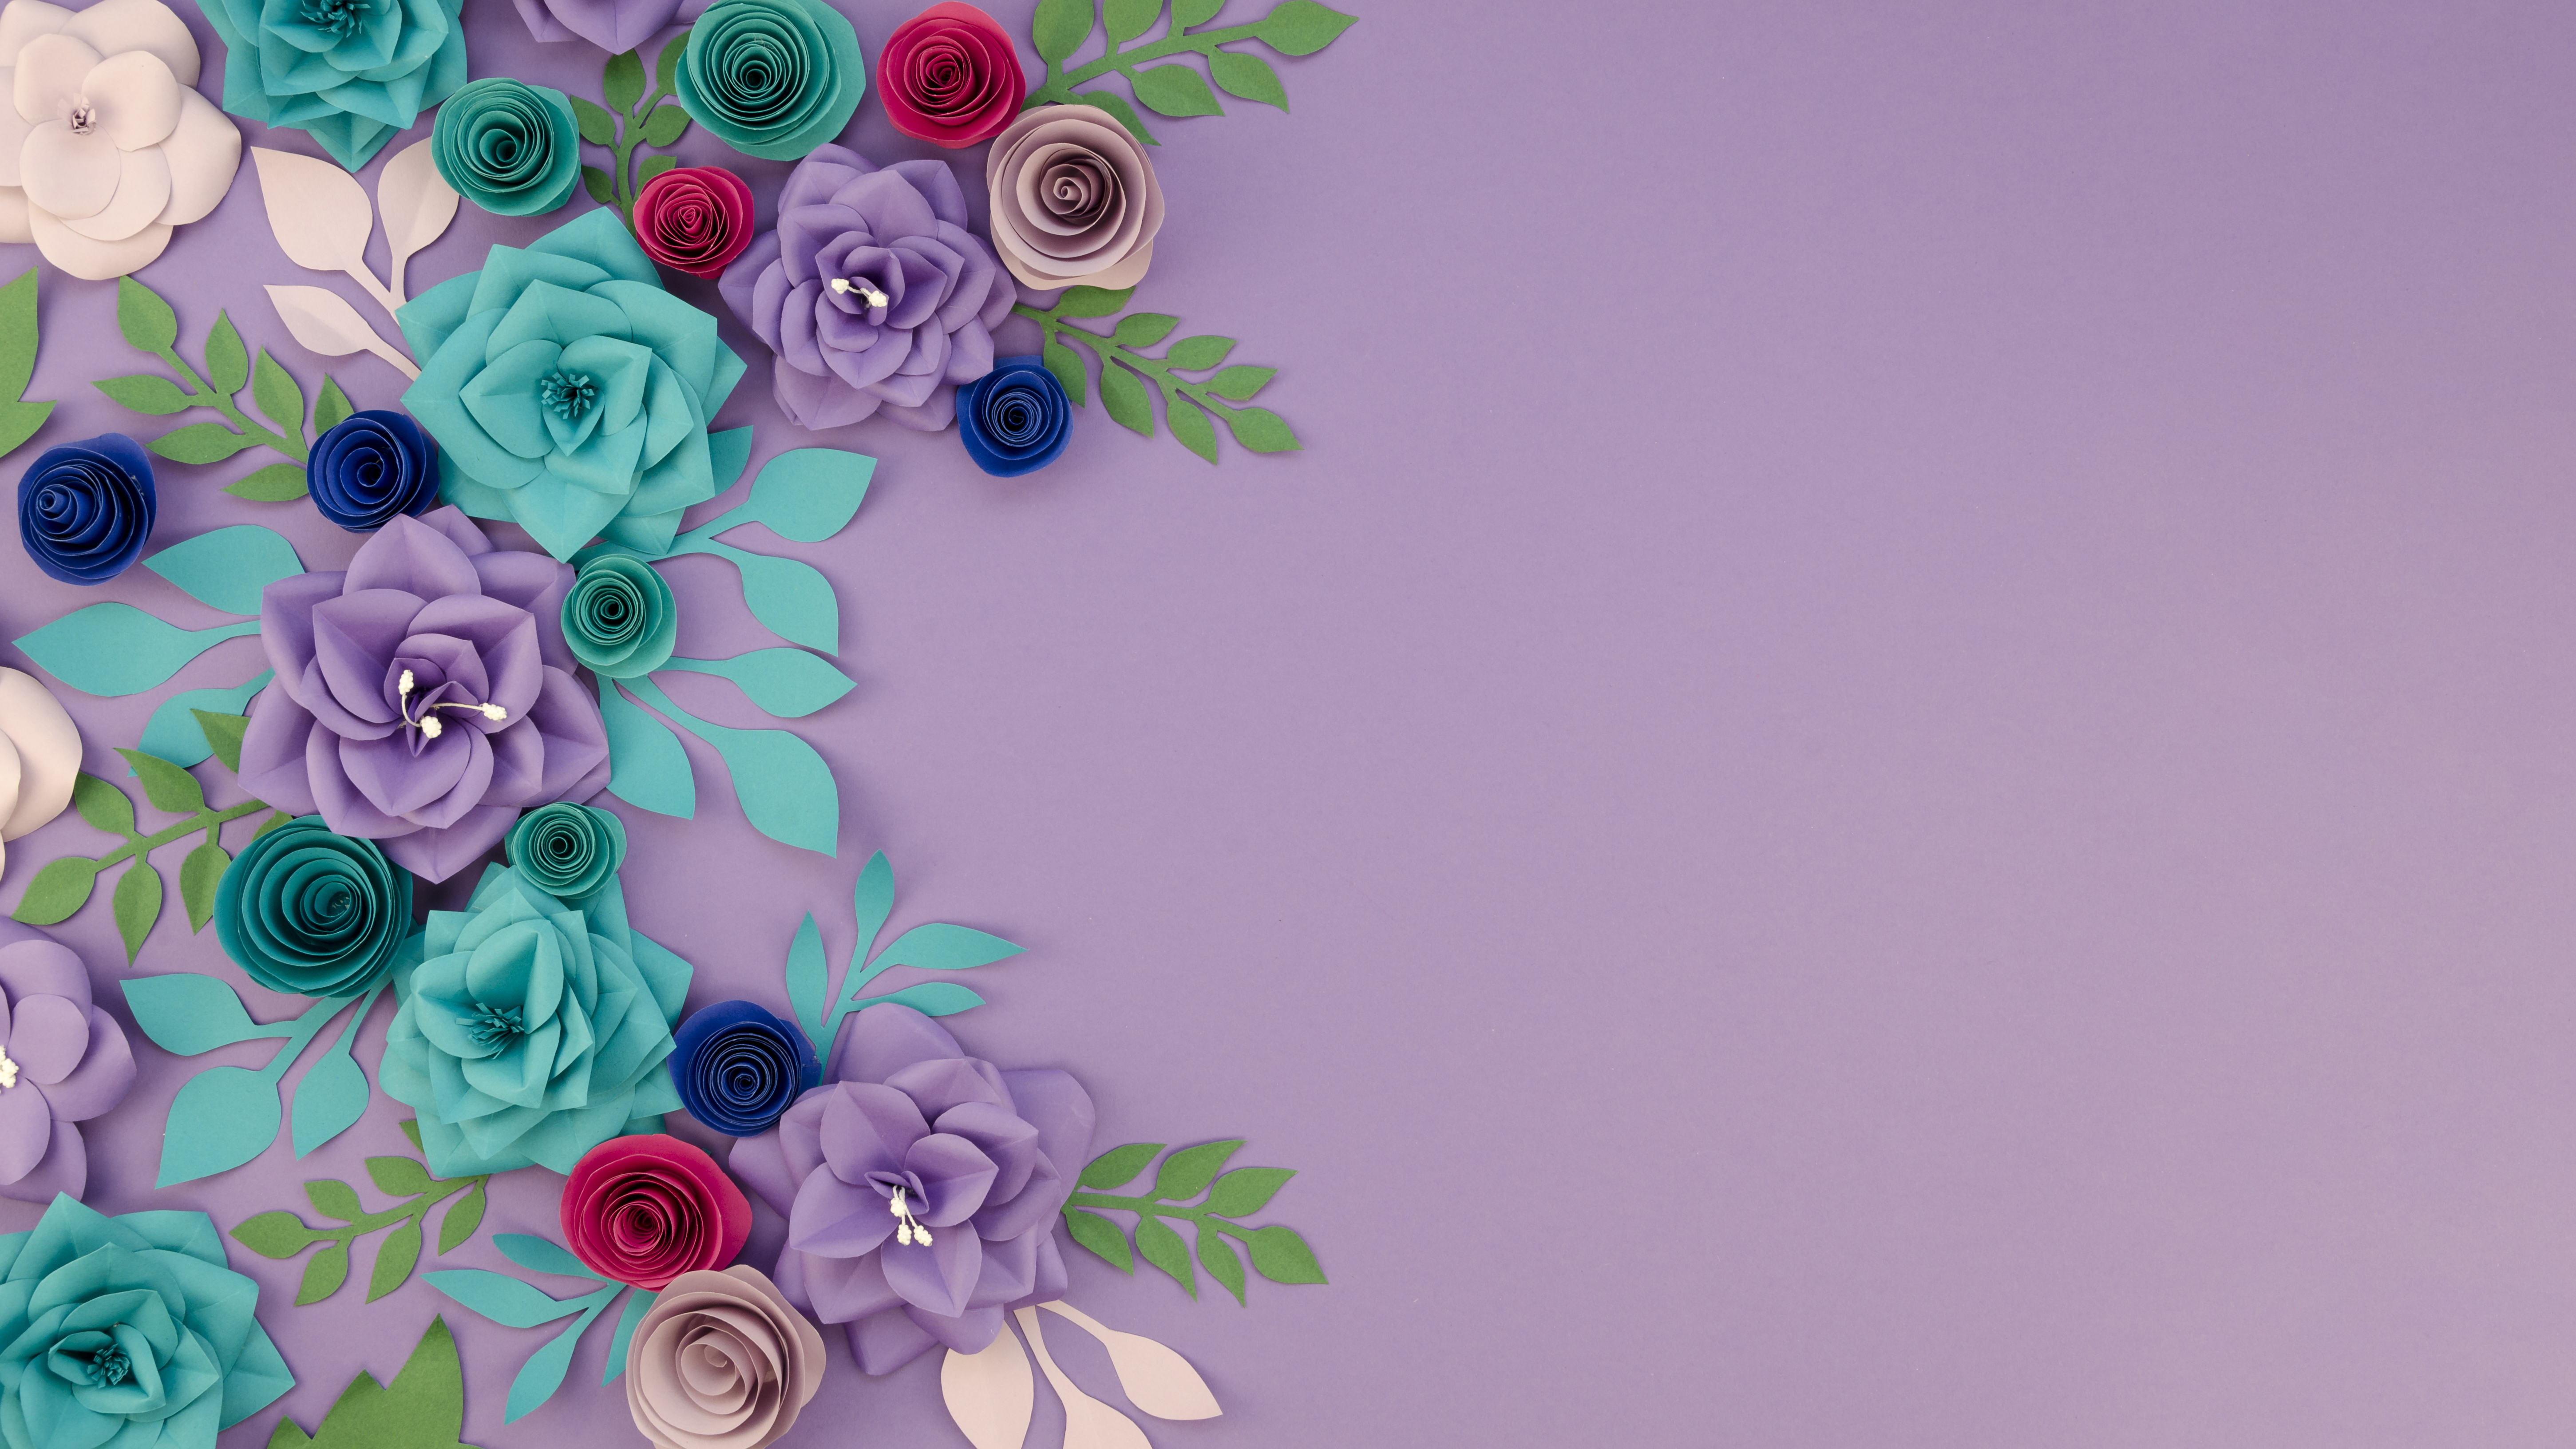 Purple background with various paper flowers scattered on the left side of the image.